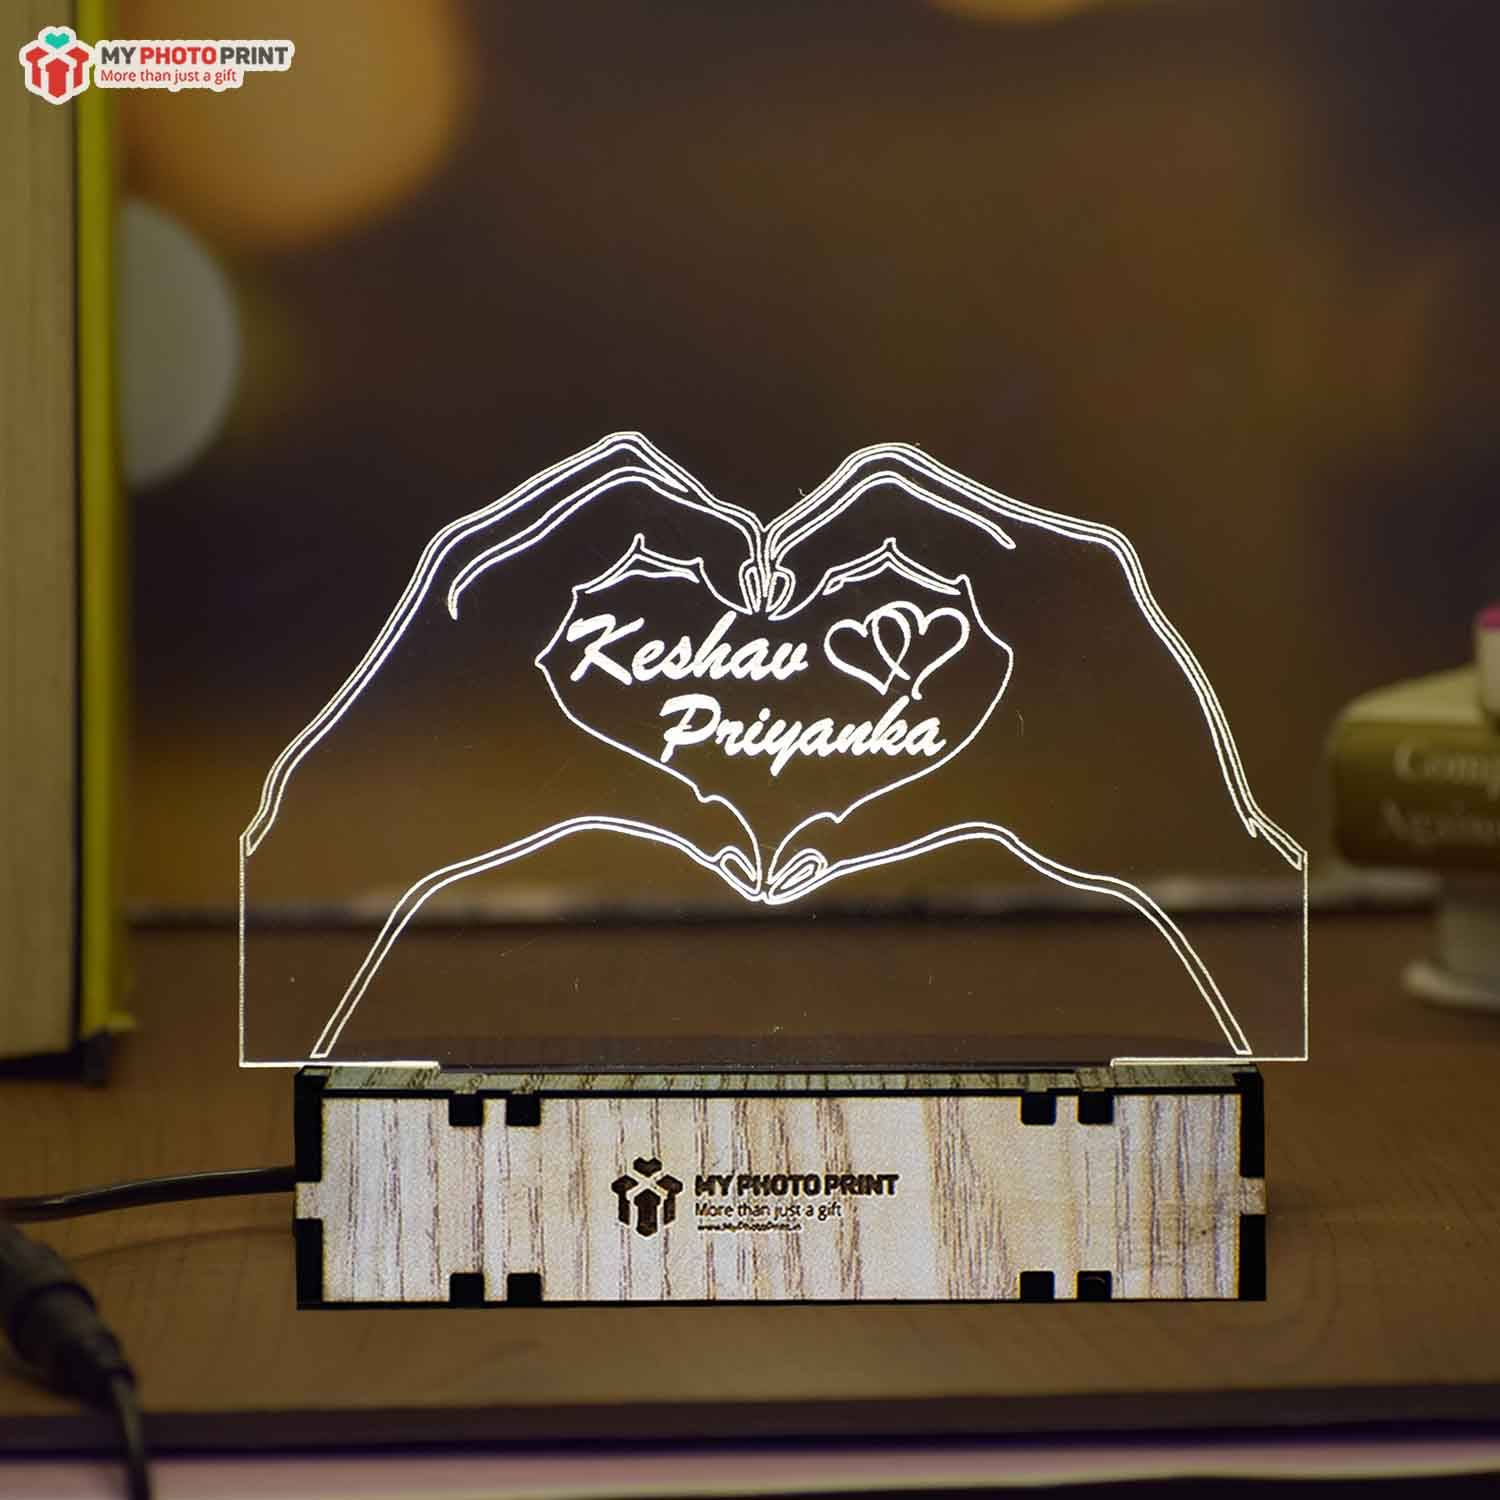 Personalized Couple Heart Shape Acrylic 3D illusion LED Lamp with Color Changing Led and Remote #1575